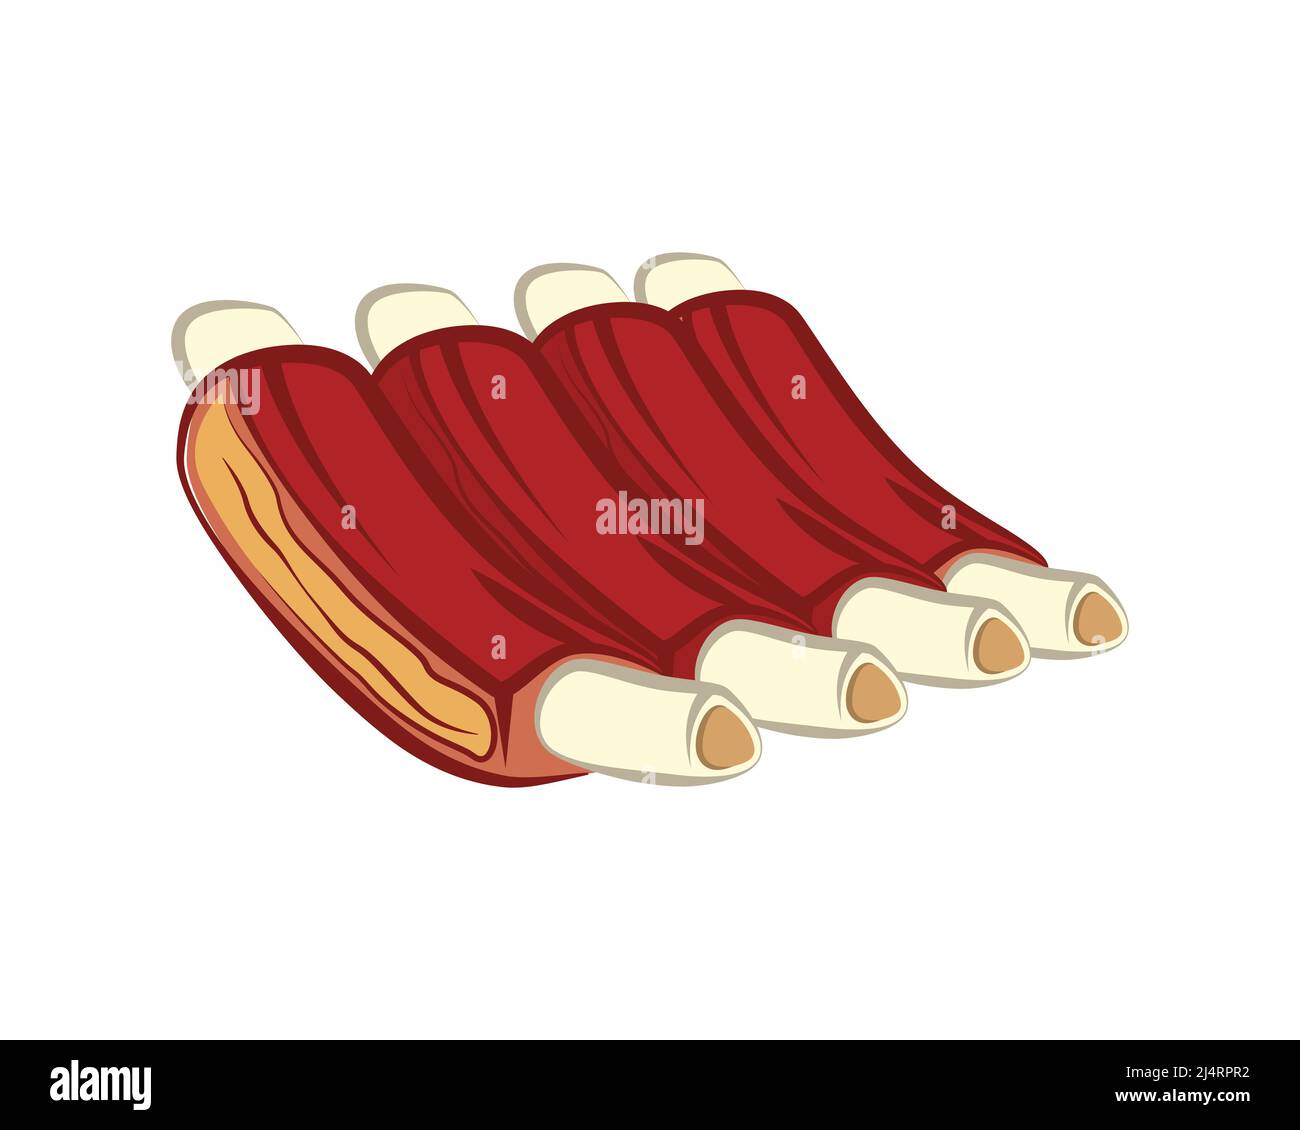 Detailed Delicious Grilled Ribs Illustration Vector Stock Vector